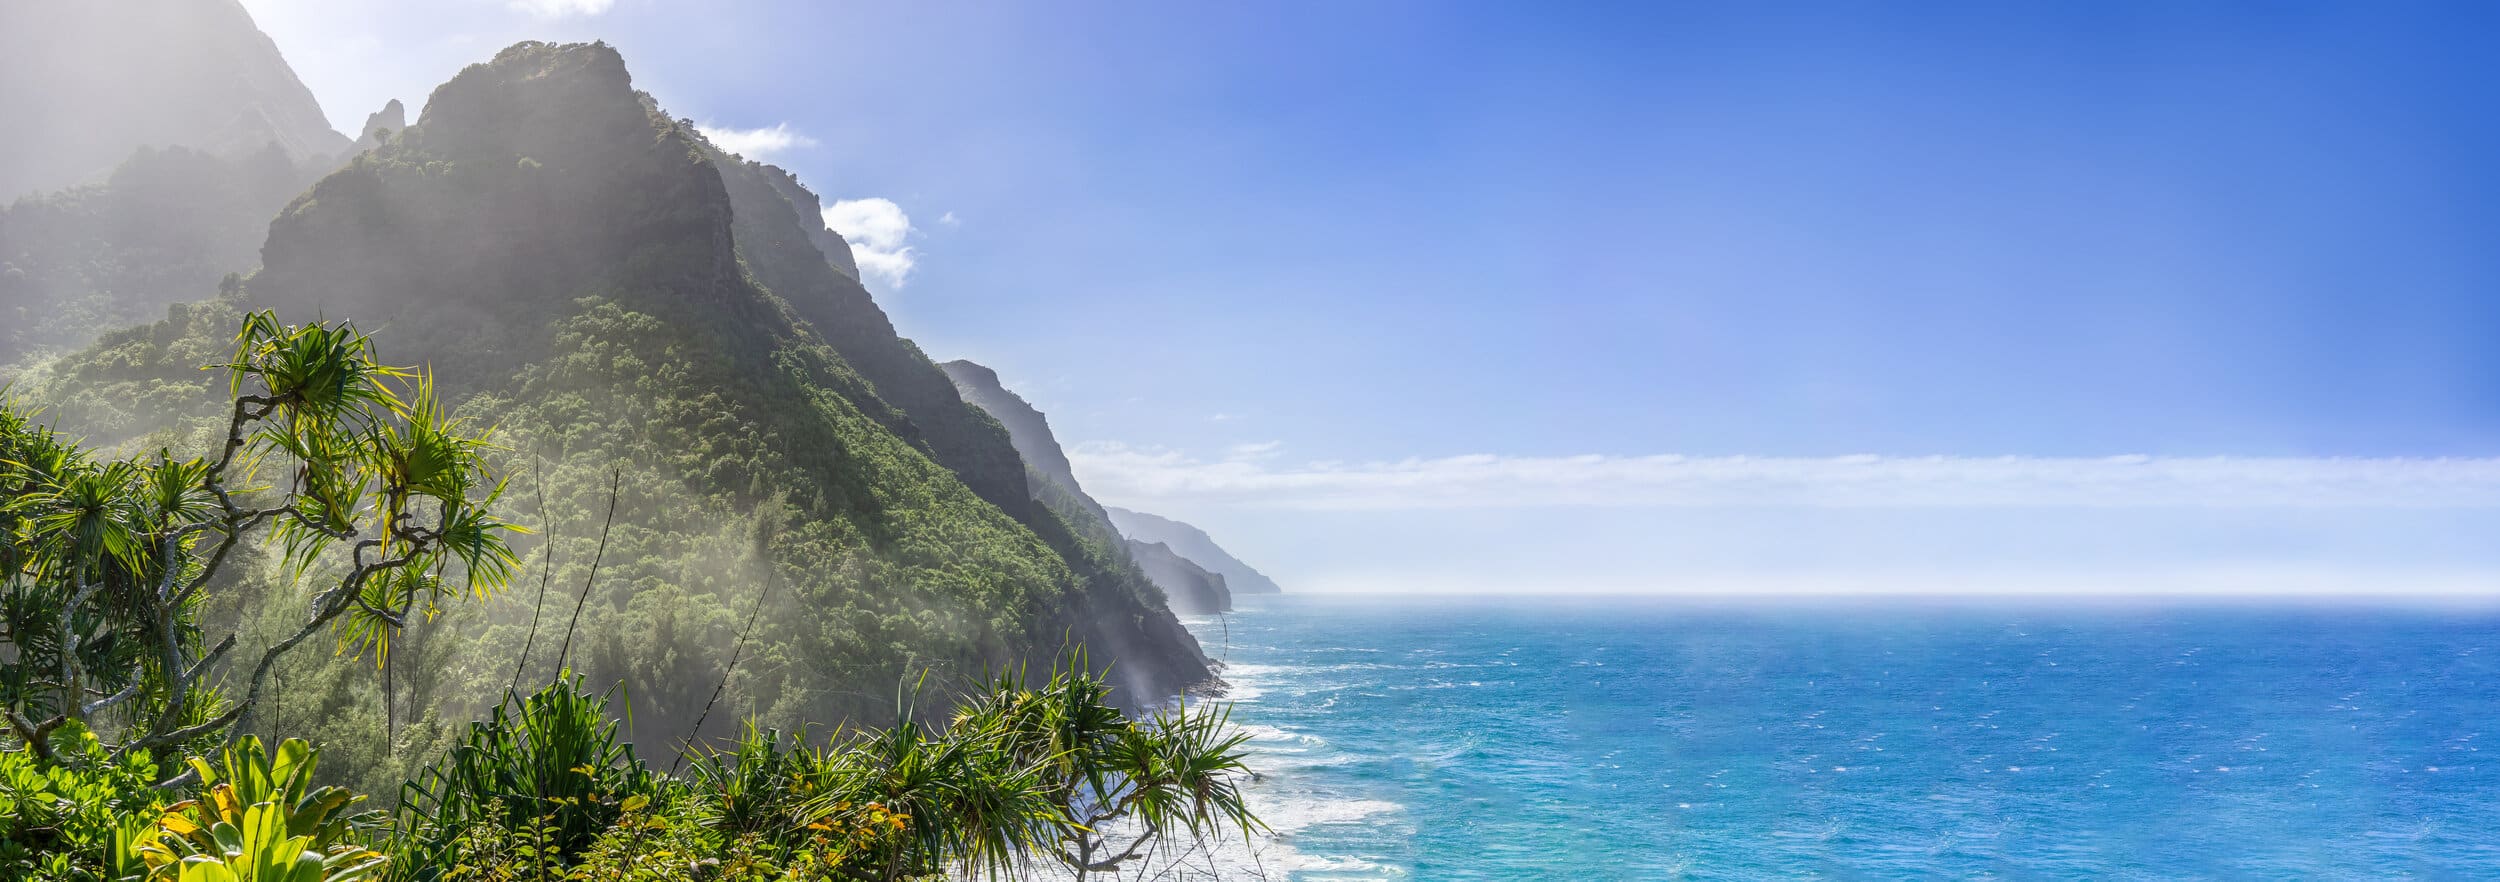 view of Ocean and mountains in Hawaii